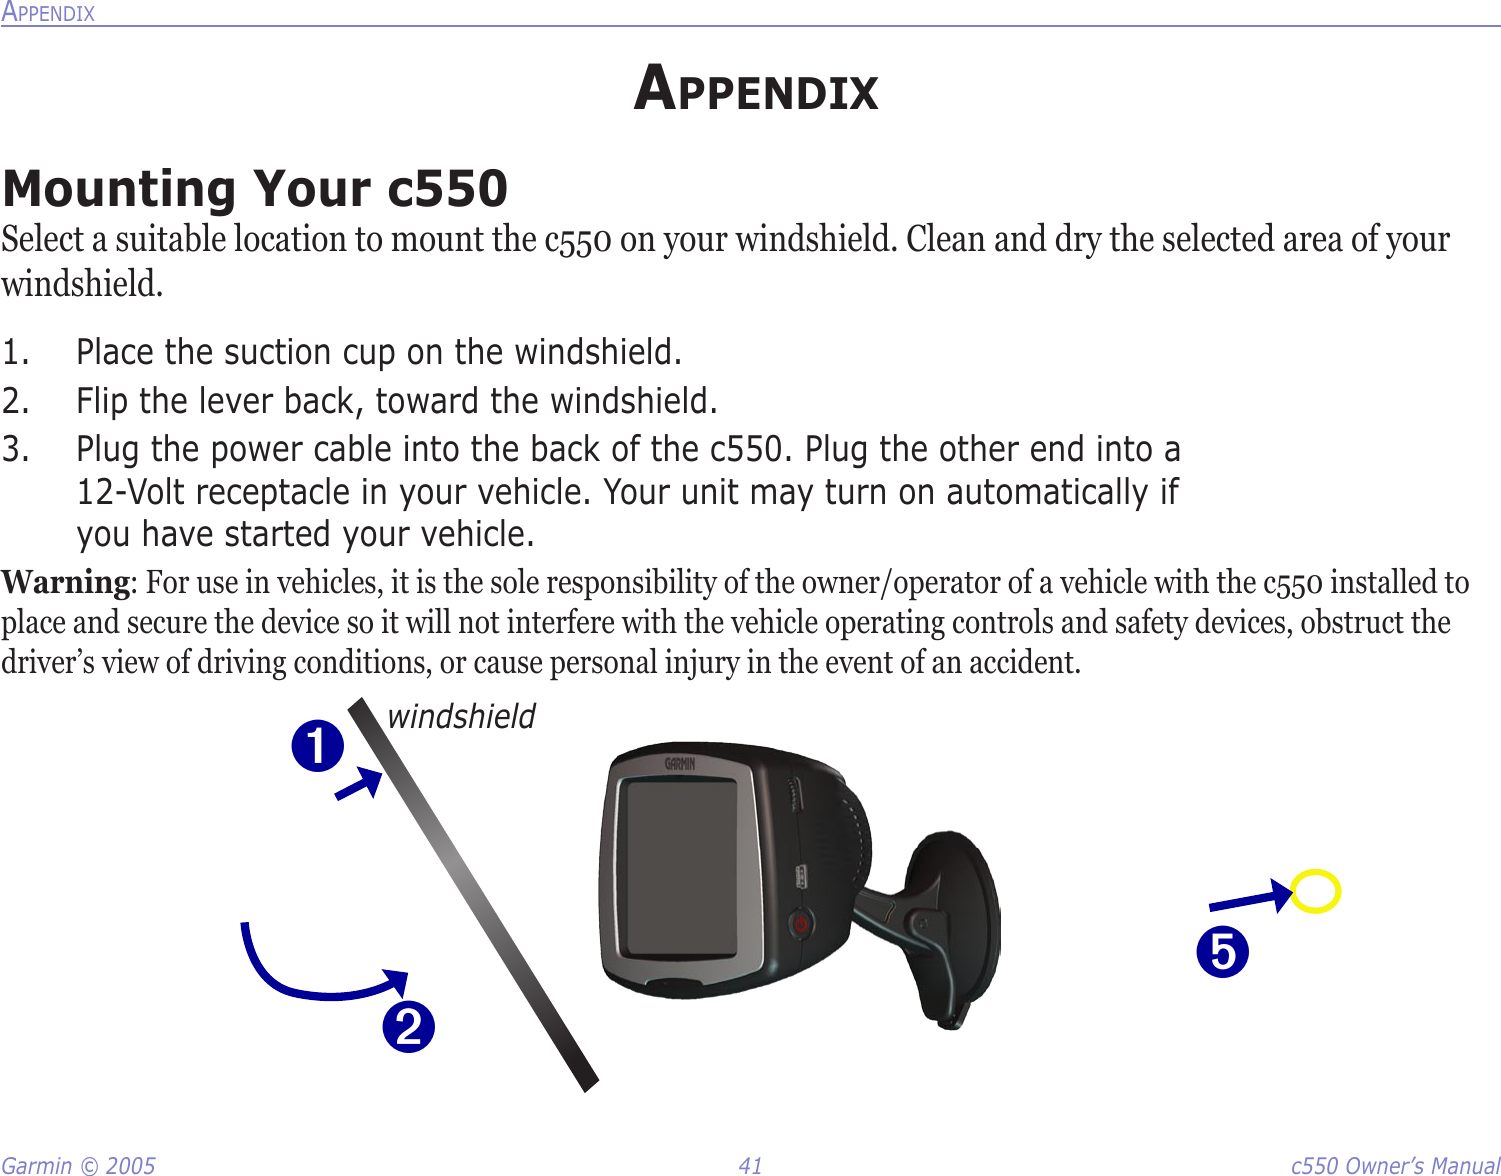 Garmin © 2005  41  c550 Owner’s ManualAPPENDIXAPPENDIXMounting Your c550Select a suitable location to mount the c550 on your windshield. Clean and dry the selected area of your windshield. 1.  Place the suction cup on the windshield. 2.  Flip the lever back, toward the windshield. 3.  Plug the power cable into the back of the c550. Plug the other end into a  12-Volt receptacle in your vehicle. Your unit may turn on automatically if  you have started your vehicle.Warning: For use in vehicles, it is the sole responsibility of the owner/operator of a vehicle with the c550 installed to place and secure the device so it will not interfere with the vehicle operating controls and safety devices, obstruct the driver’s view of driving conditions, or cause personal injury in the event of an accident.➊➋windshield➎